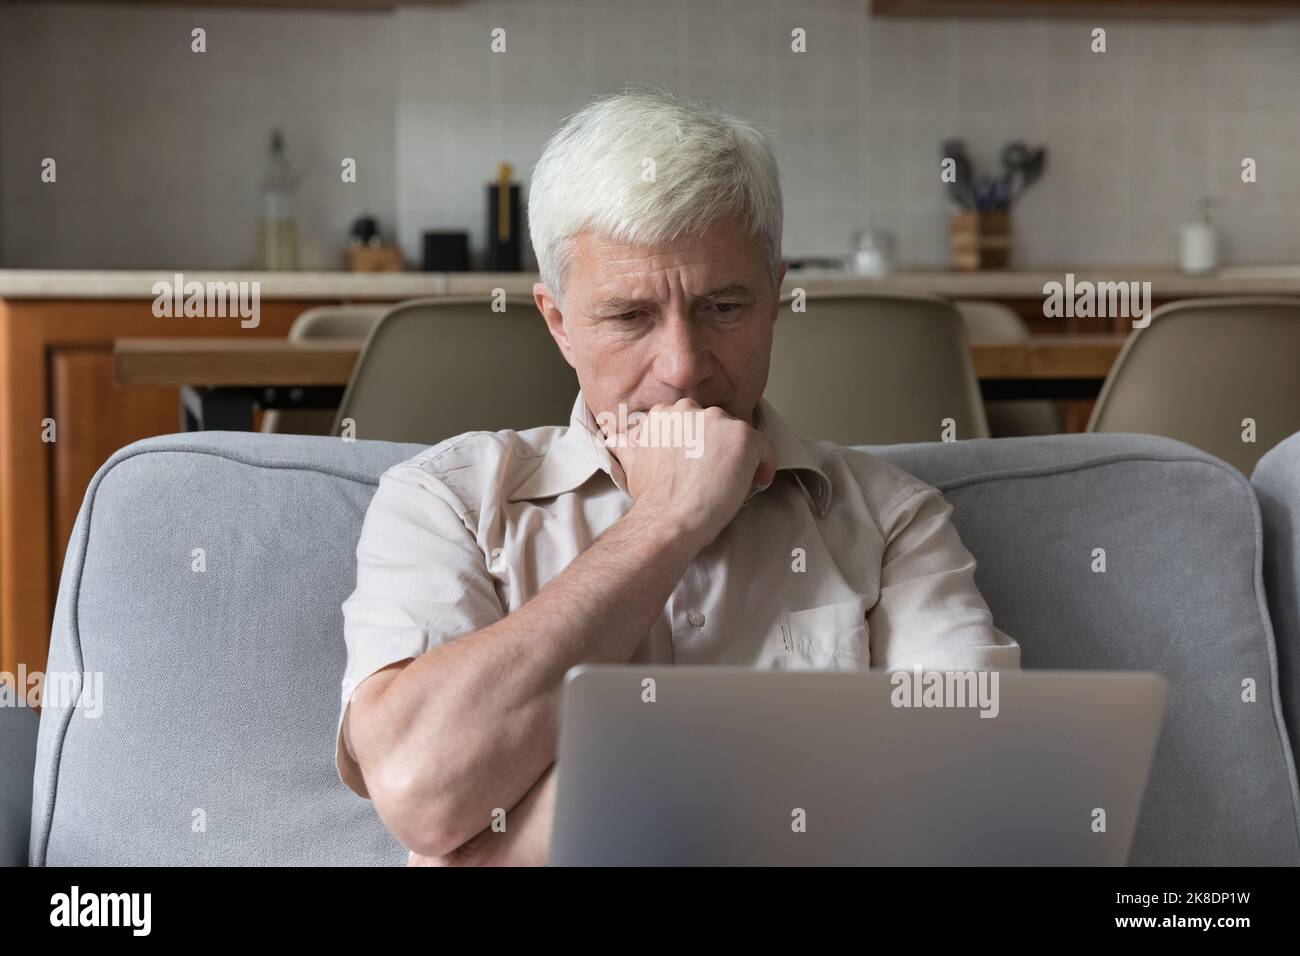 Serious thoughtful older man sit on couch with laptop Stock Photo